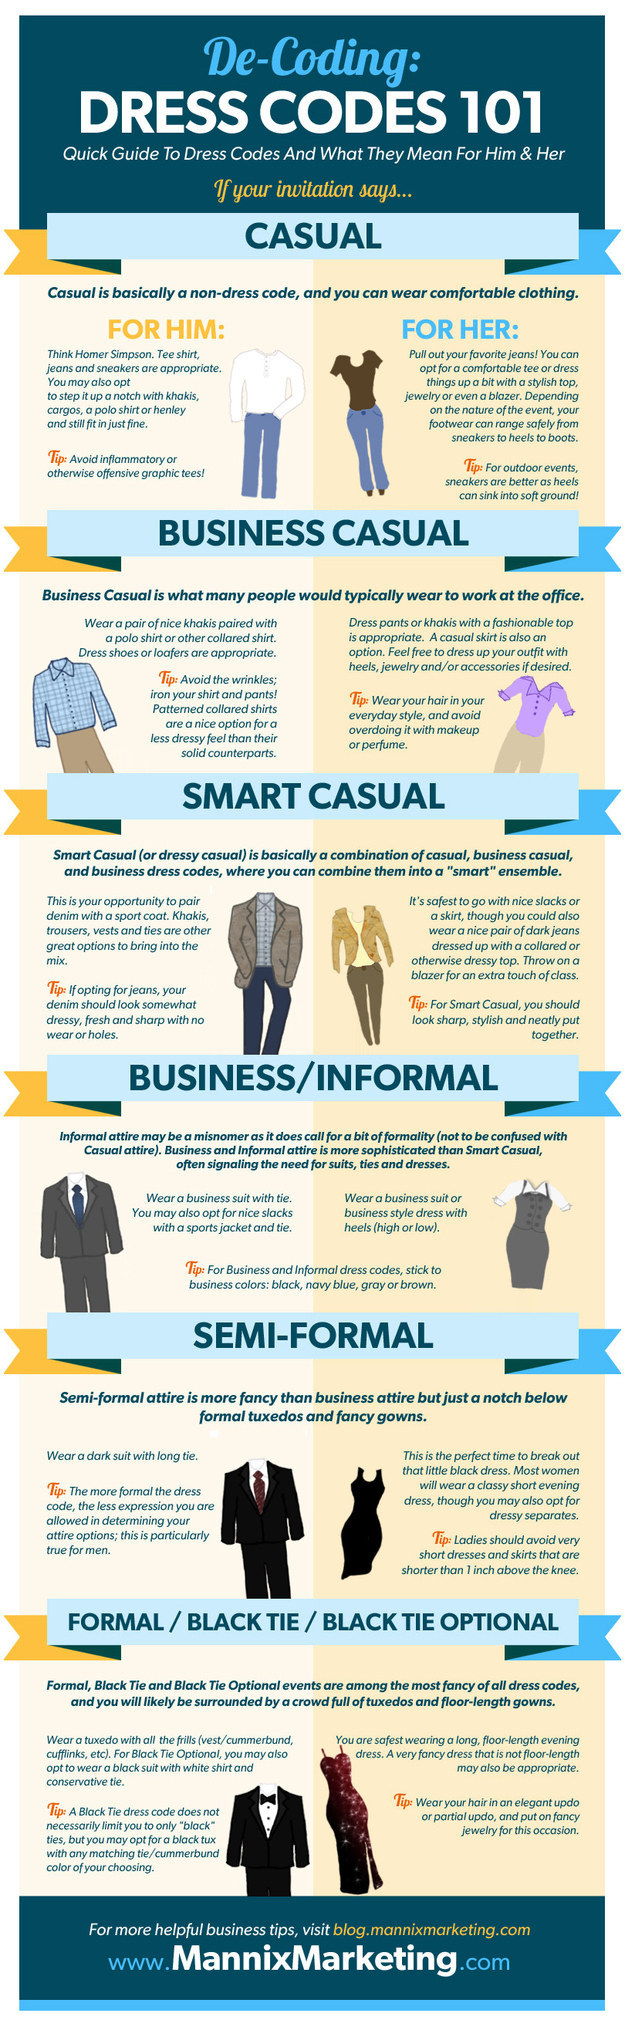 Figuring out the difference between business casual and smart casual and semi-formal can drive you batcrackers. This should help: